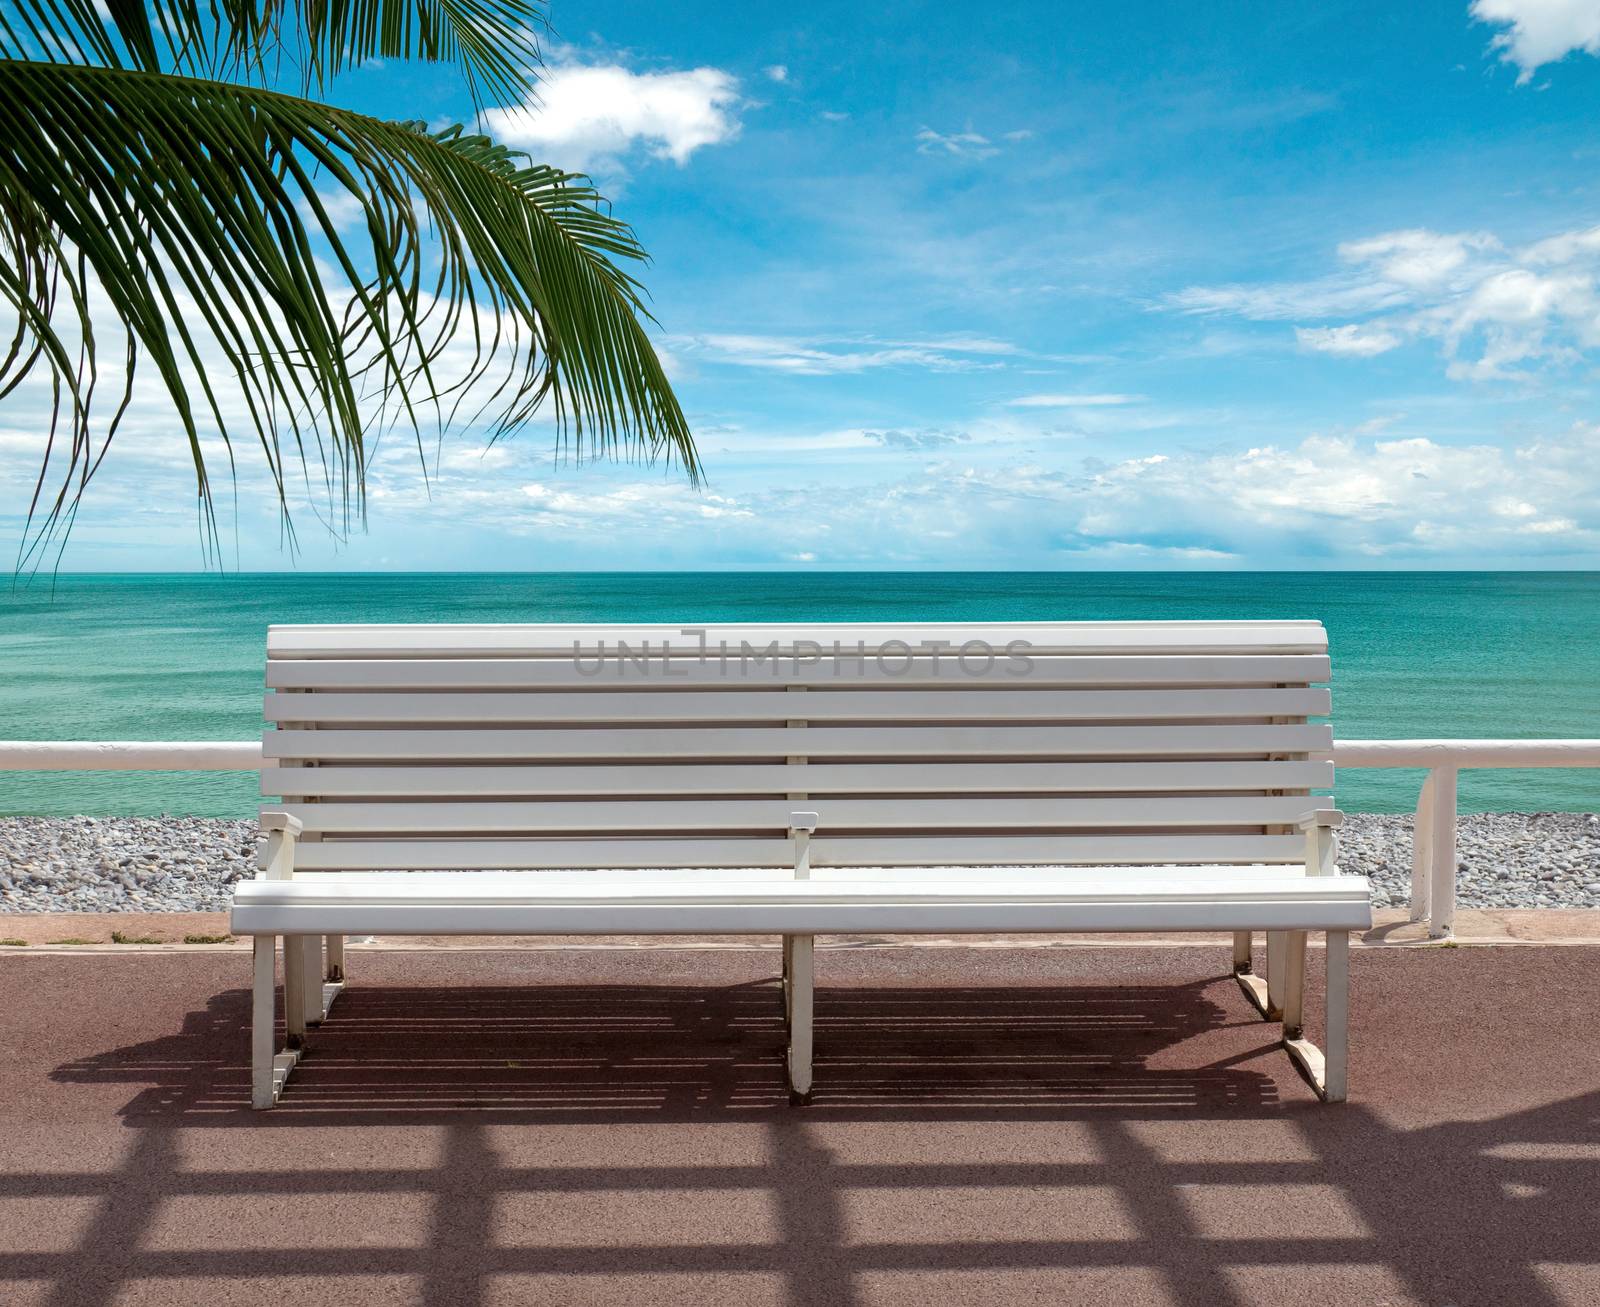 Empty bench overlooking the sea. Promenade des Anglais, Nice, France.